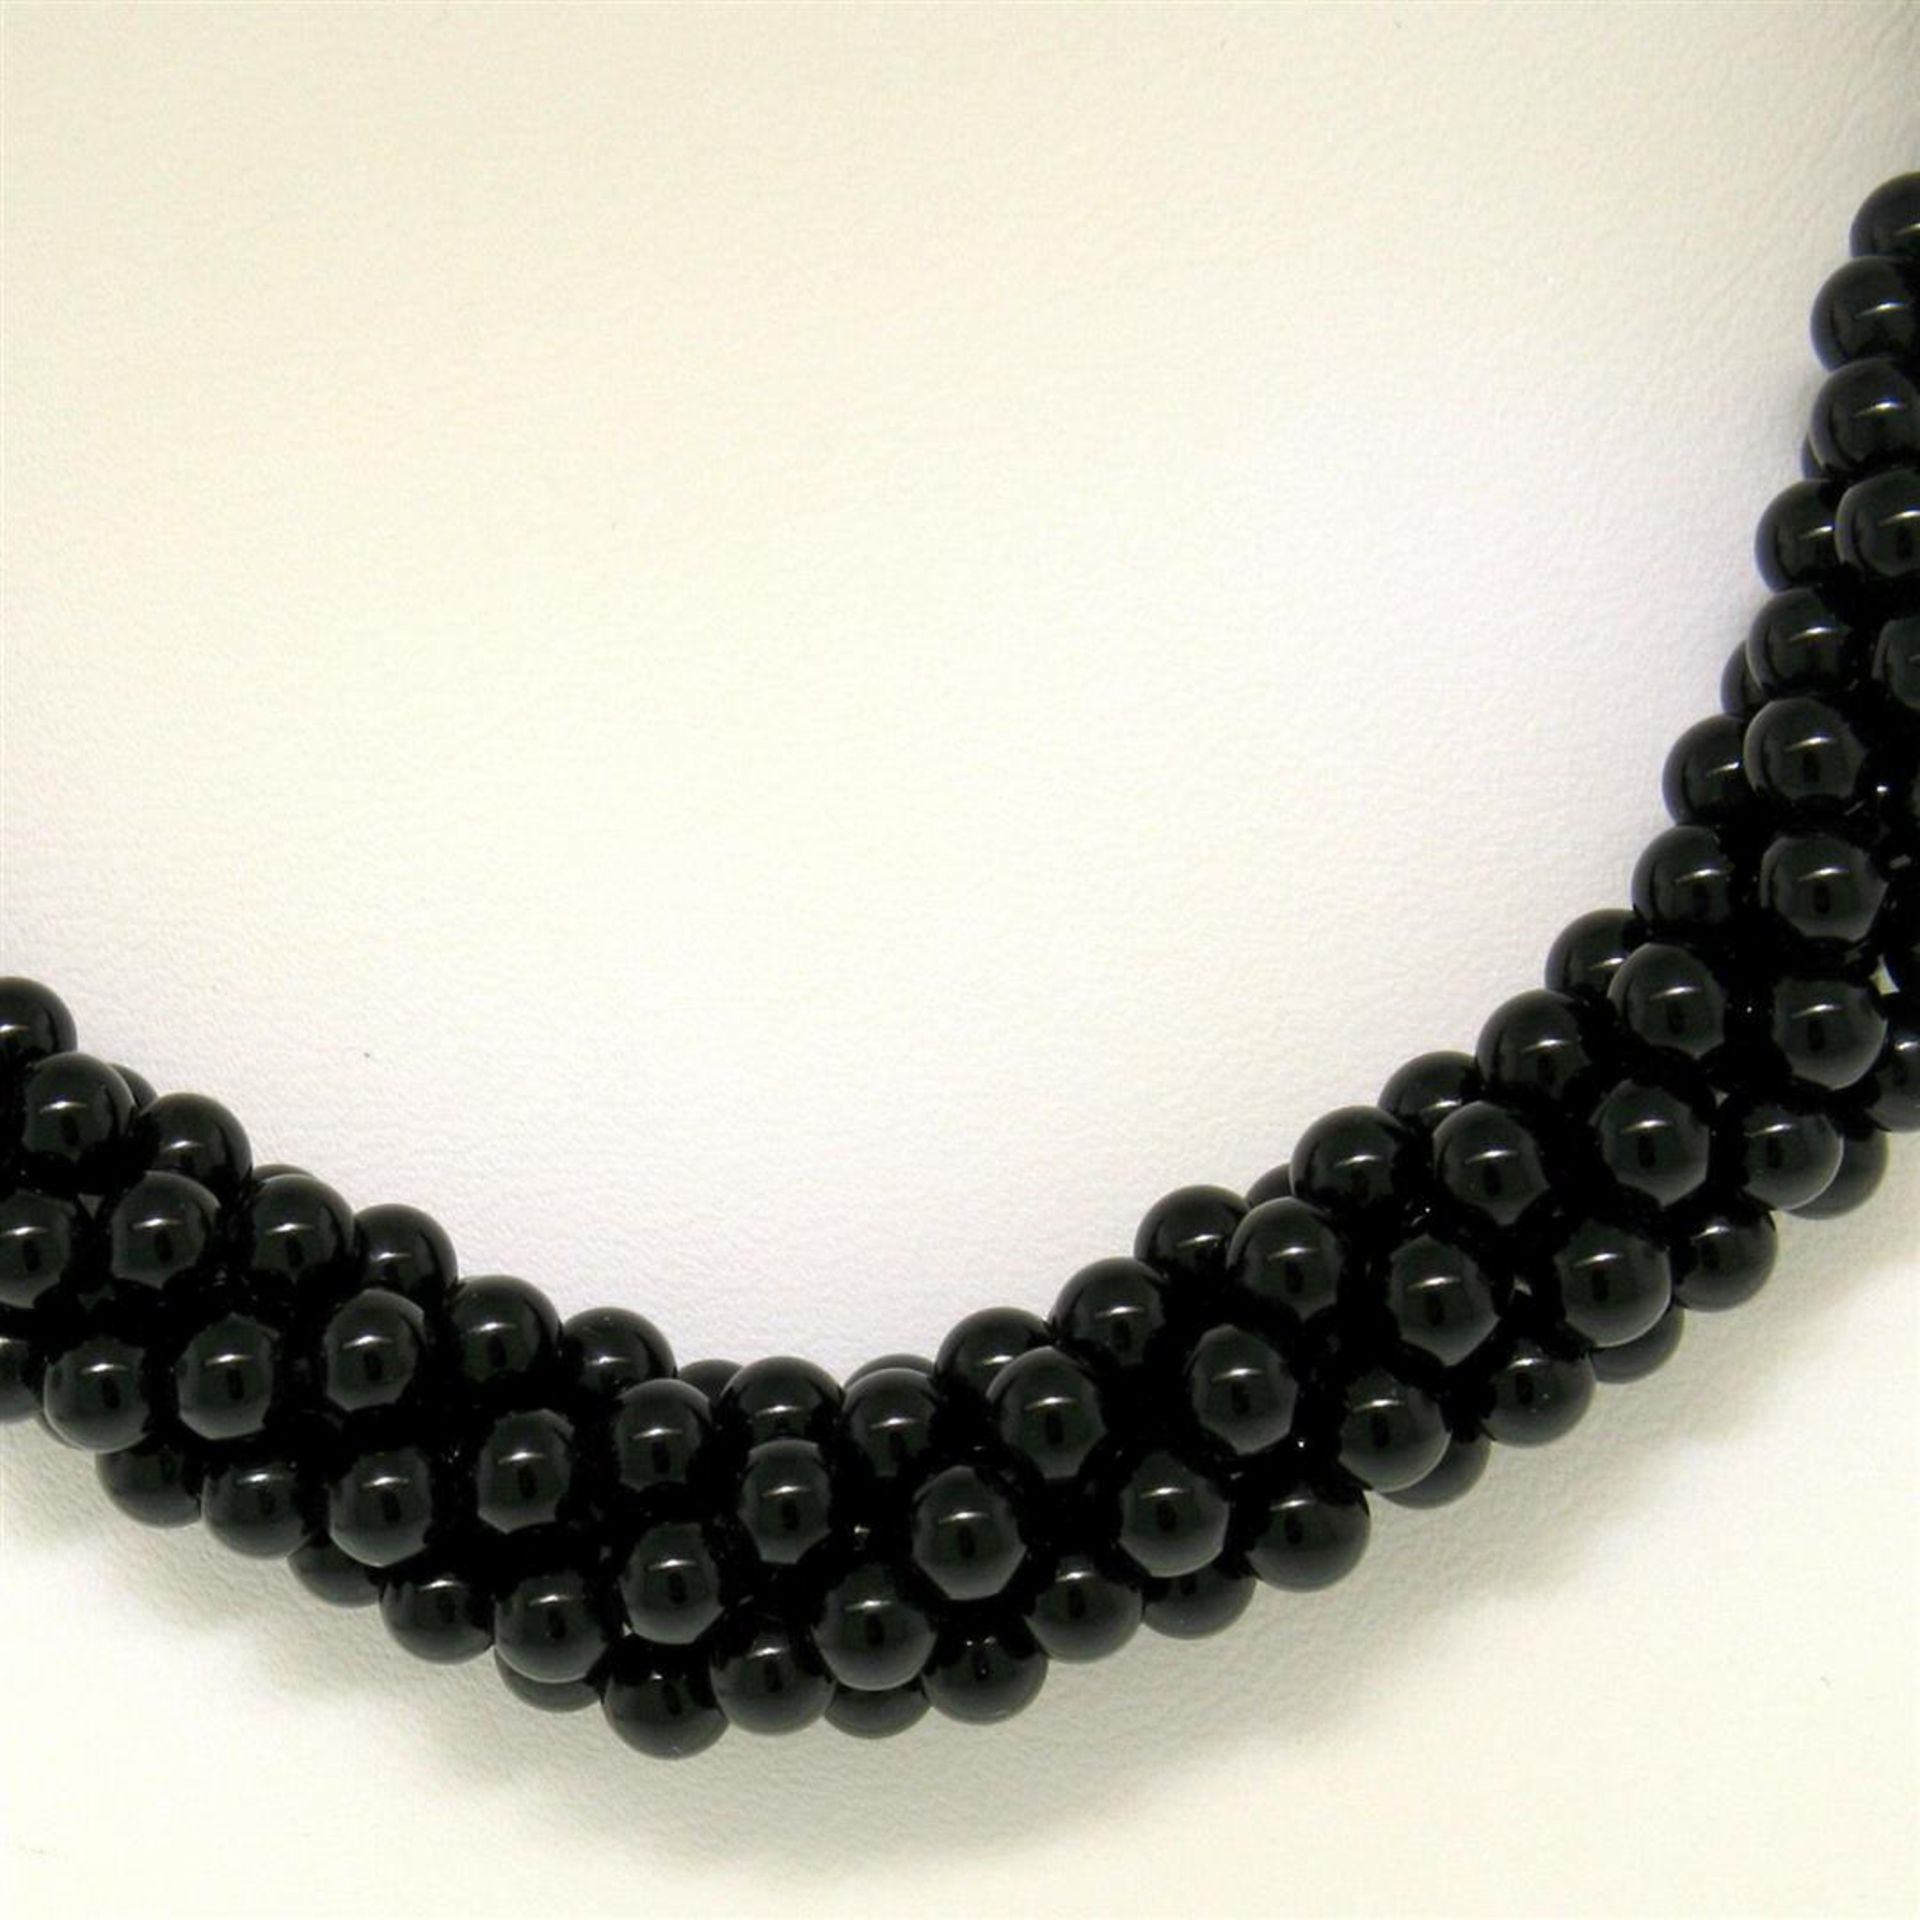 14k Gold Long Multi Strand Black Onyx Necklace w/ Freshwater Pearl & Coral Bead - Image 2 of 4